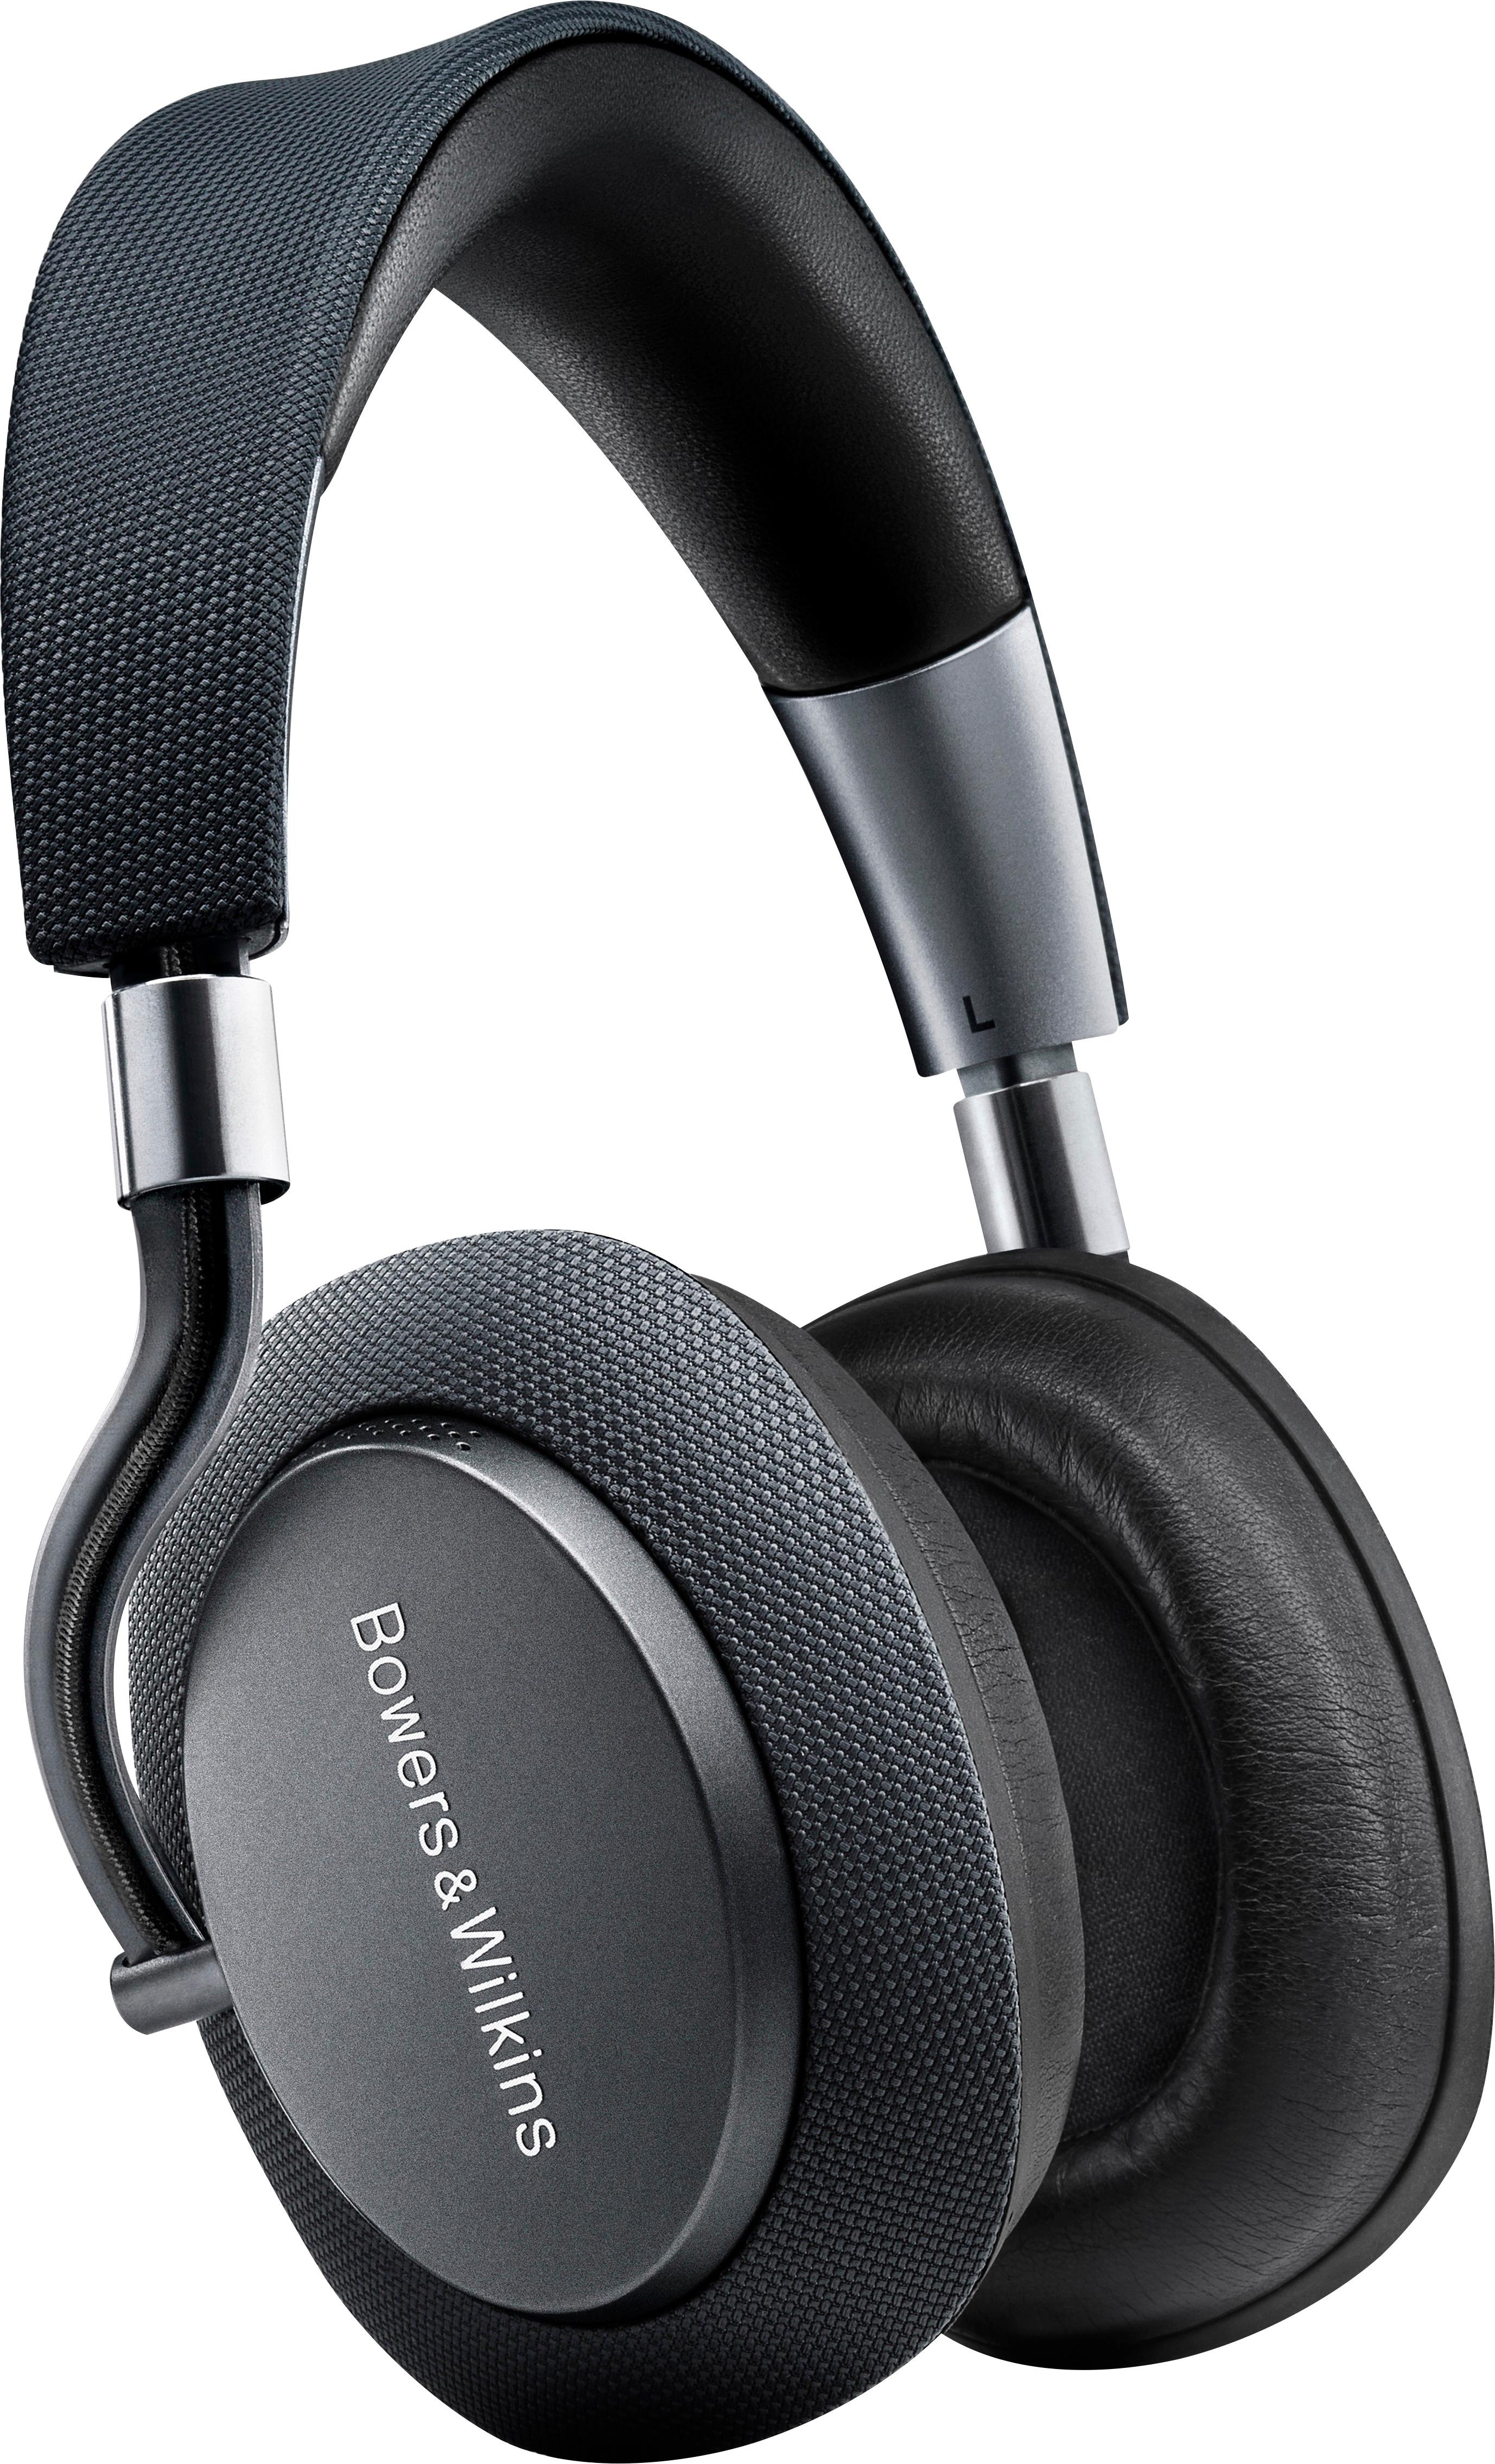 Rent to own Bowers & Wilkins - PX Wireless Noise Cancelling Over-the-Ear Headphones - Space Gray